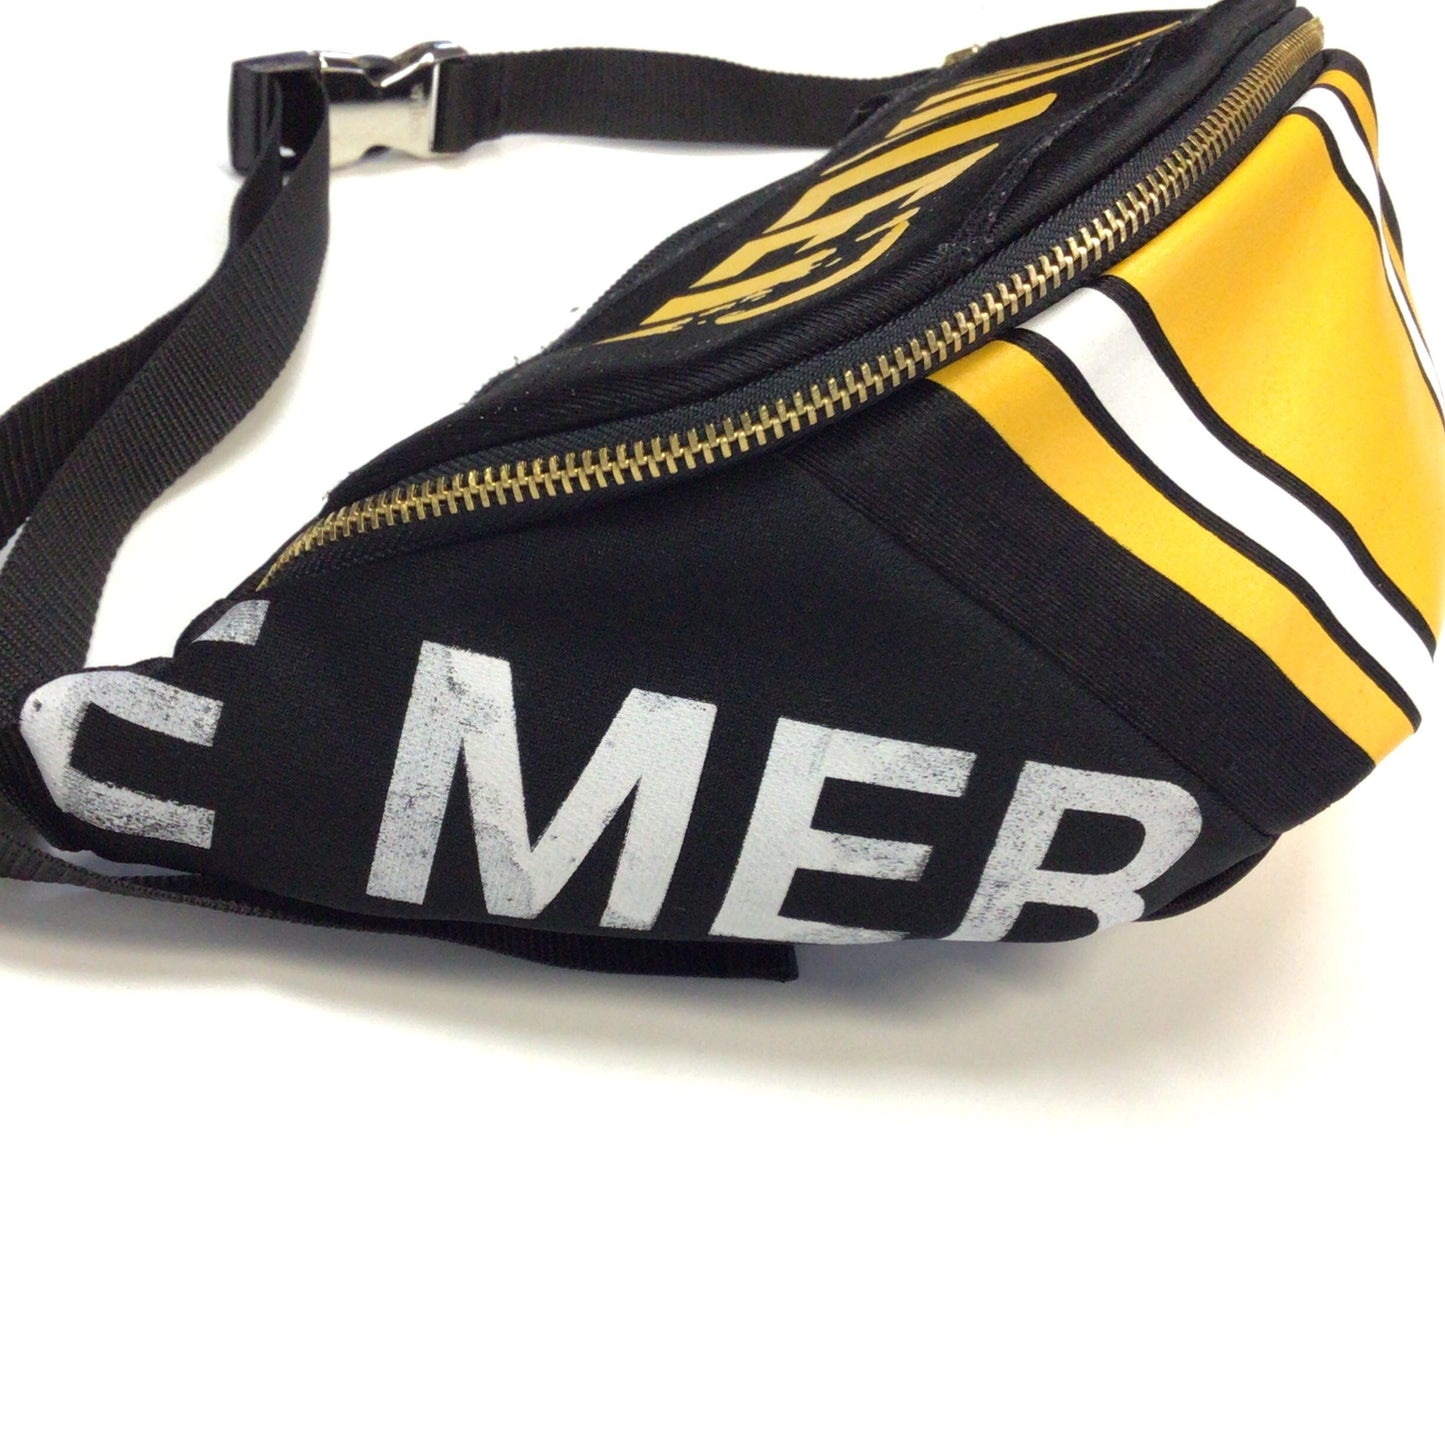 NFL Football Jersey  "MILLER" Amekaji Japanese Vintage Handmade Custom One and Only One Cote Mer Upcycle Sustainable Upscale Street Fashion Embroidered Remake Deconstructed Shirts Waist Bag